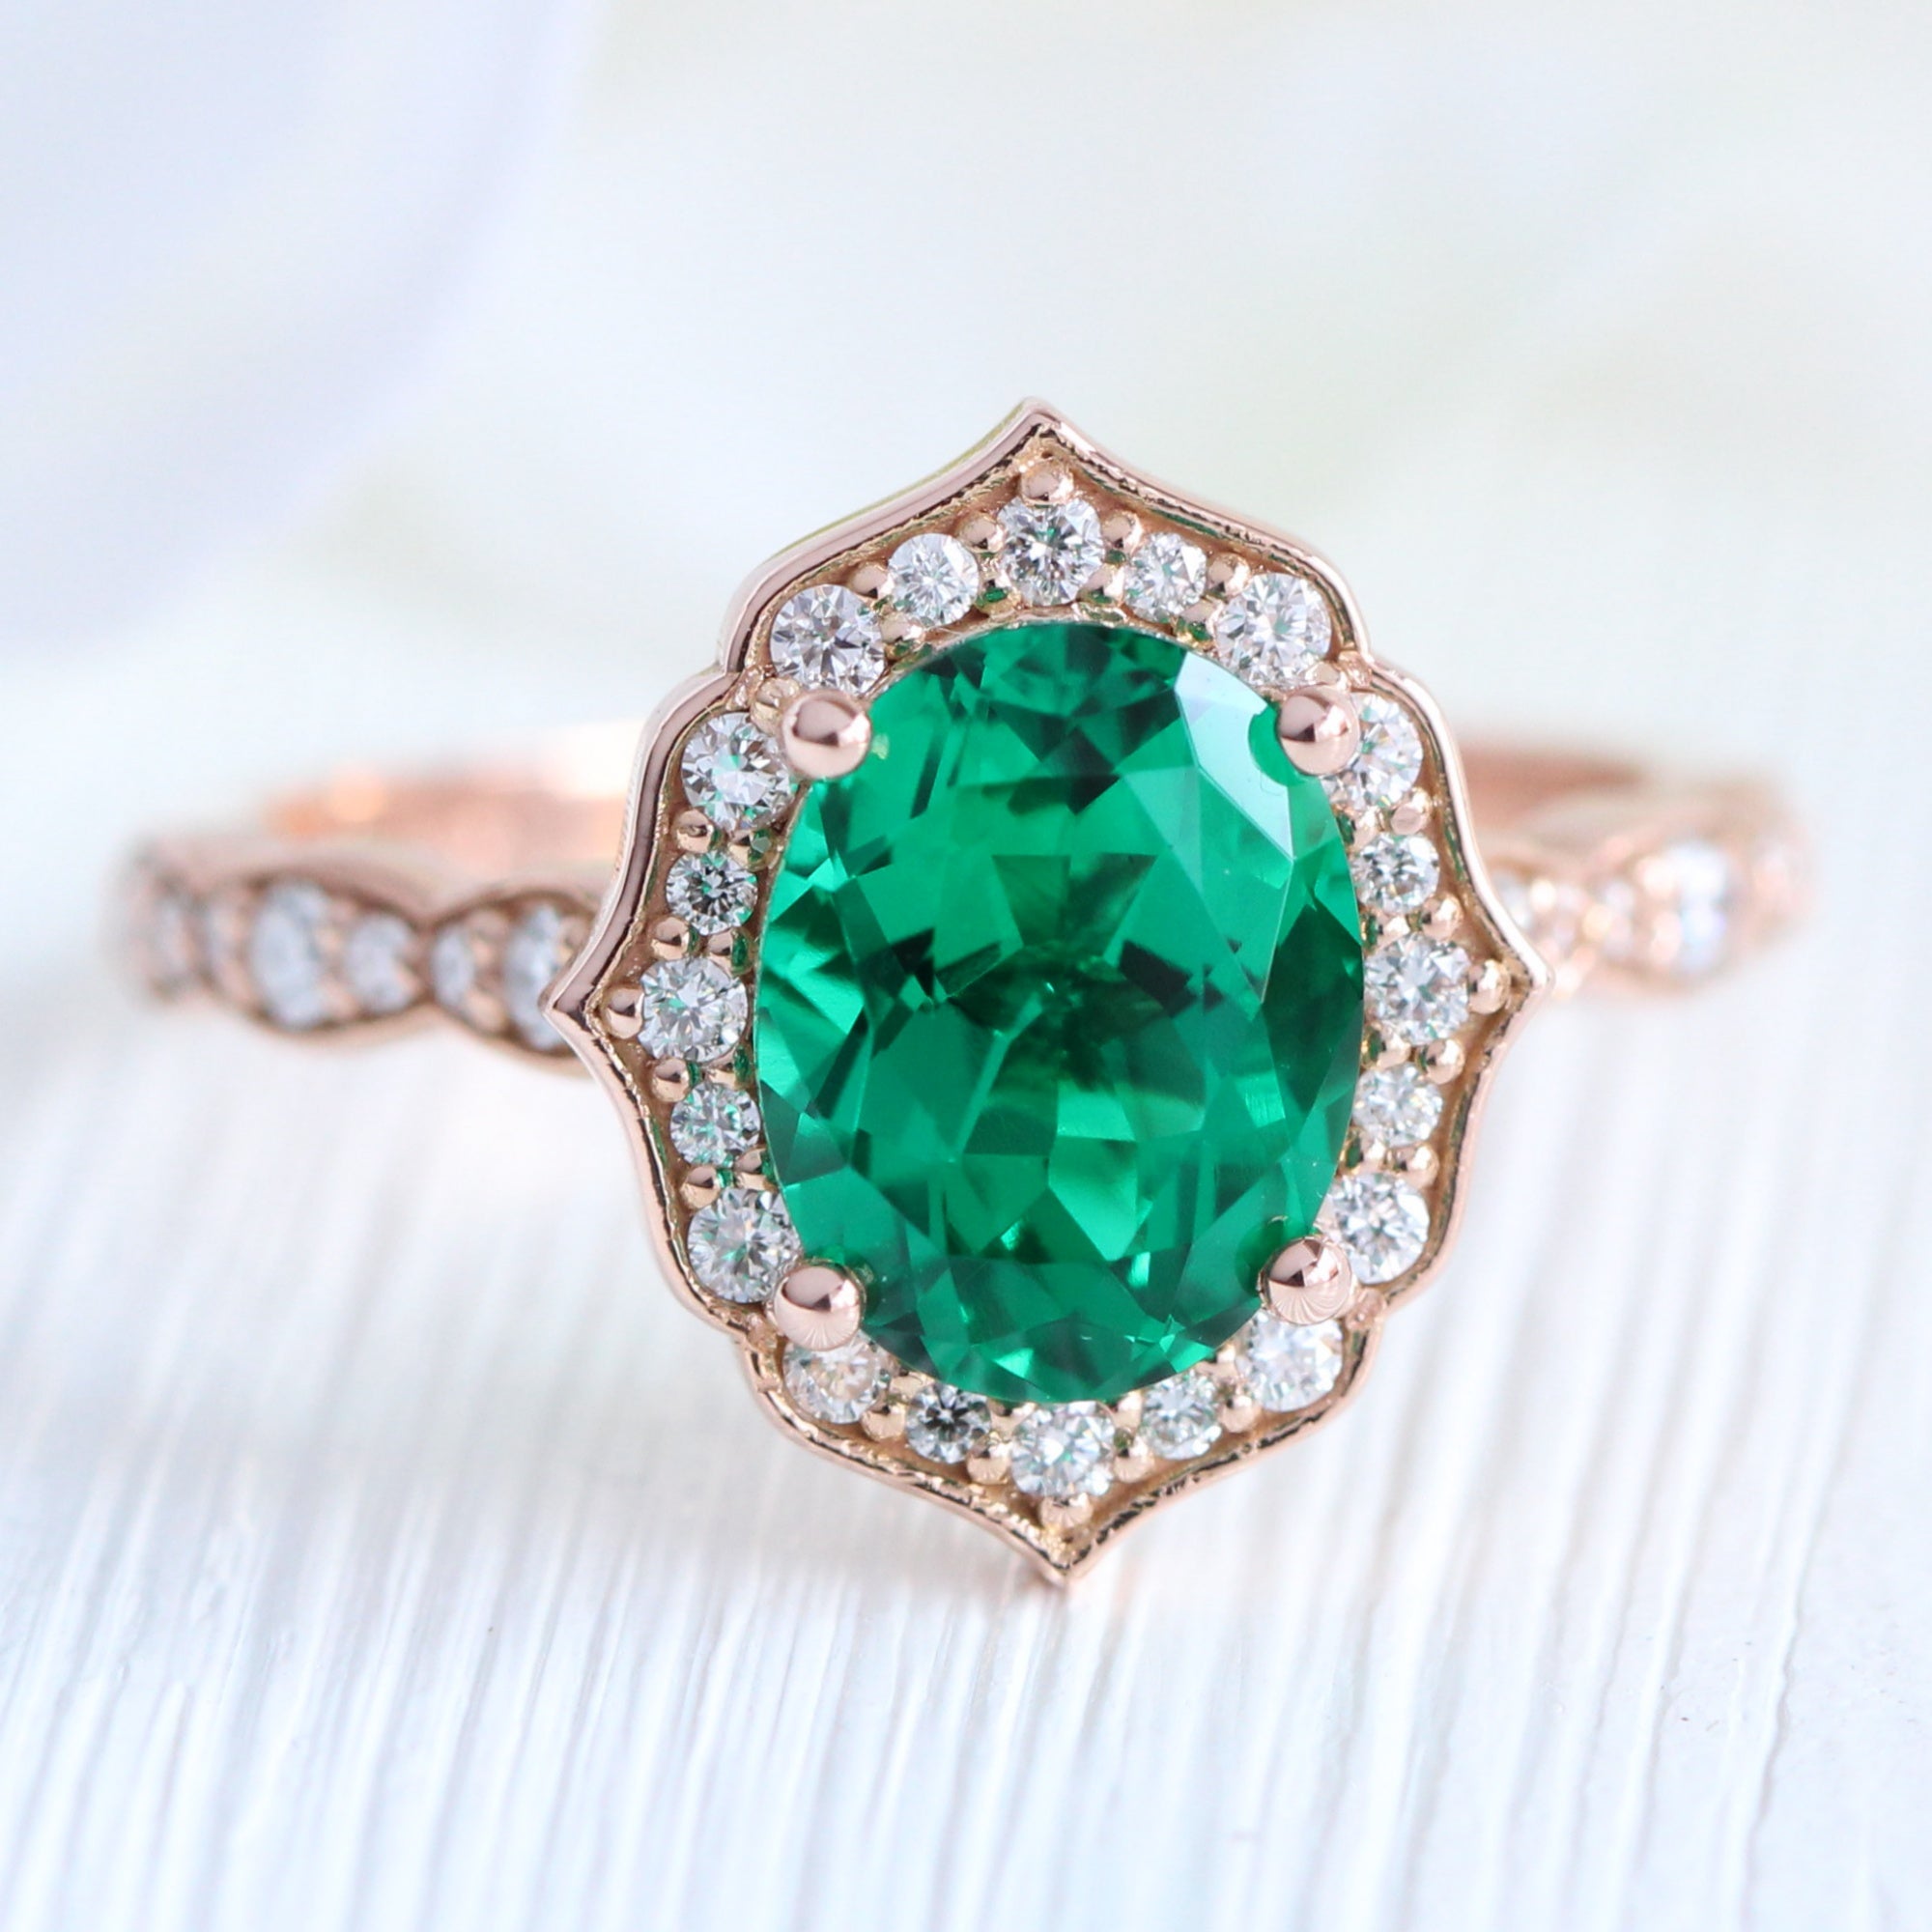 Buy Emerald Rings Online in Pakistan at Affordable Prices | Roxari